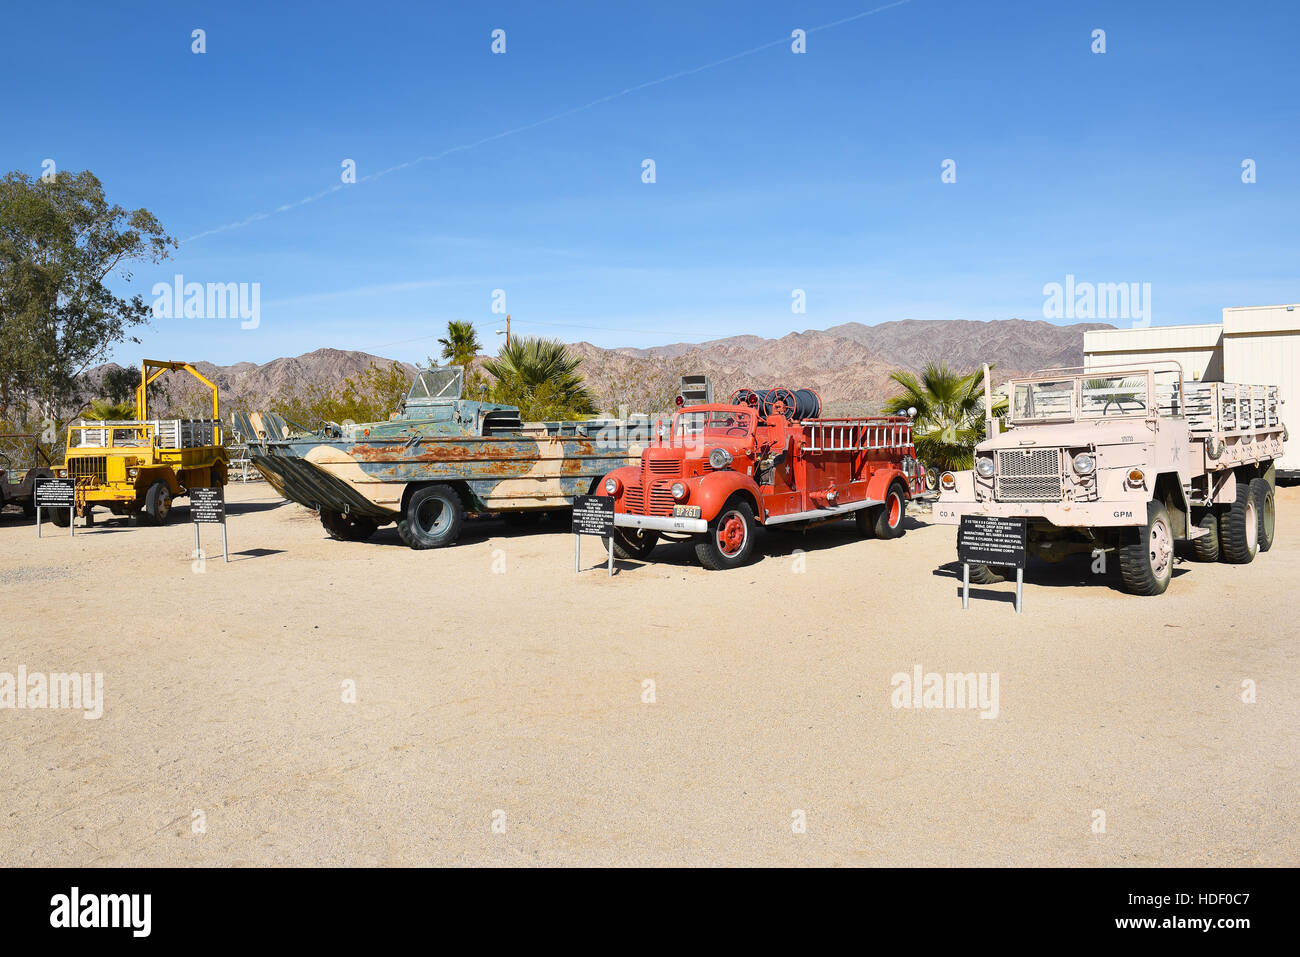 CHIRIACO SUMMIT, CA - DECEMBER 10, 2016: Military Vehicles on display at the General Patton Memorial Museum, near the site of the WWII Desert Training Stock Photo